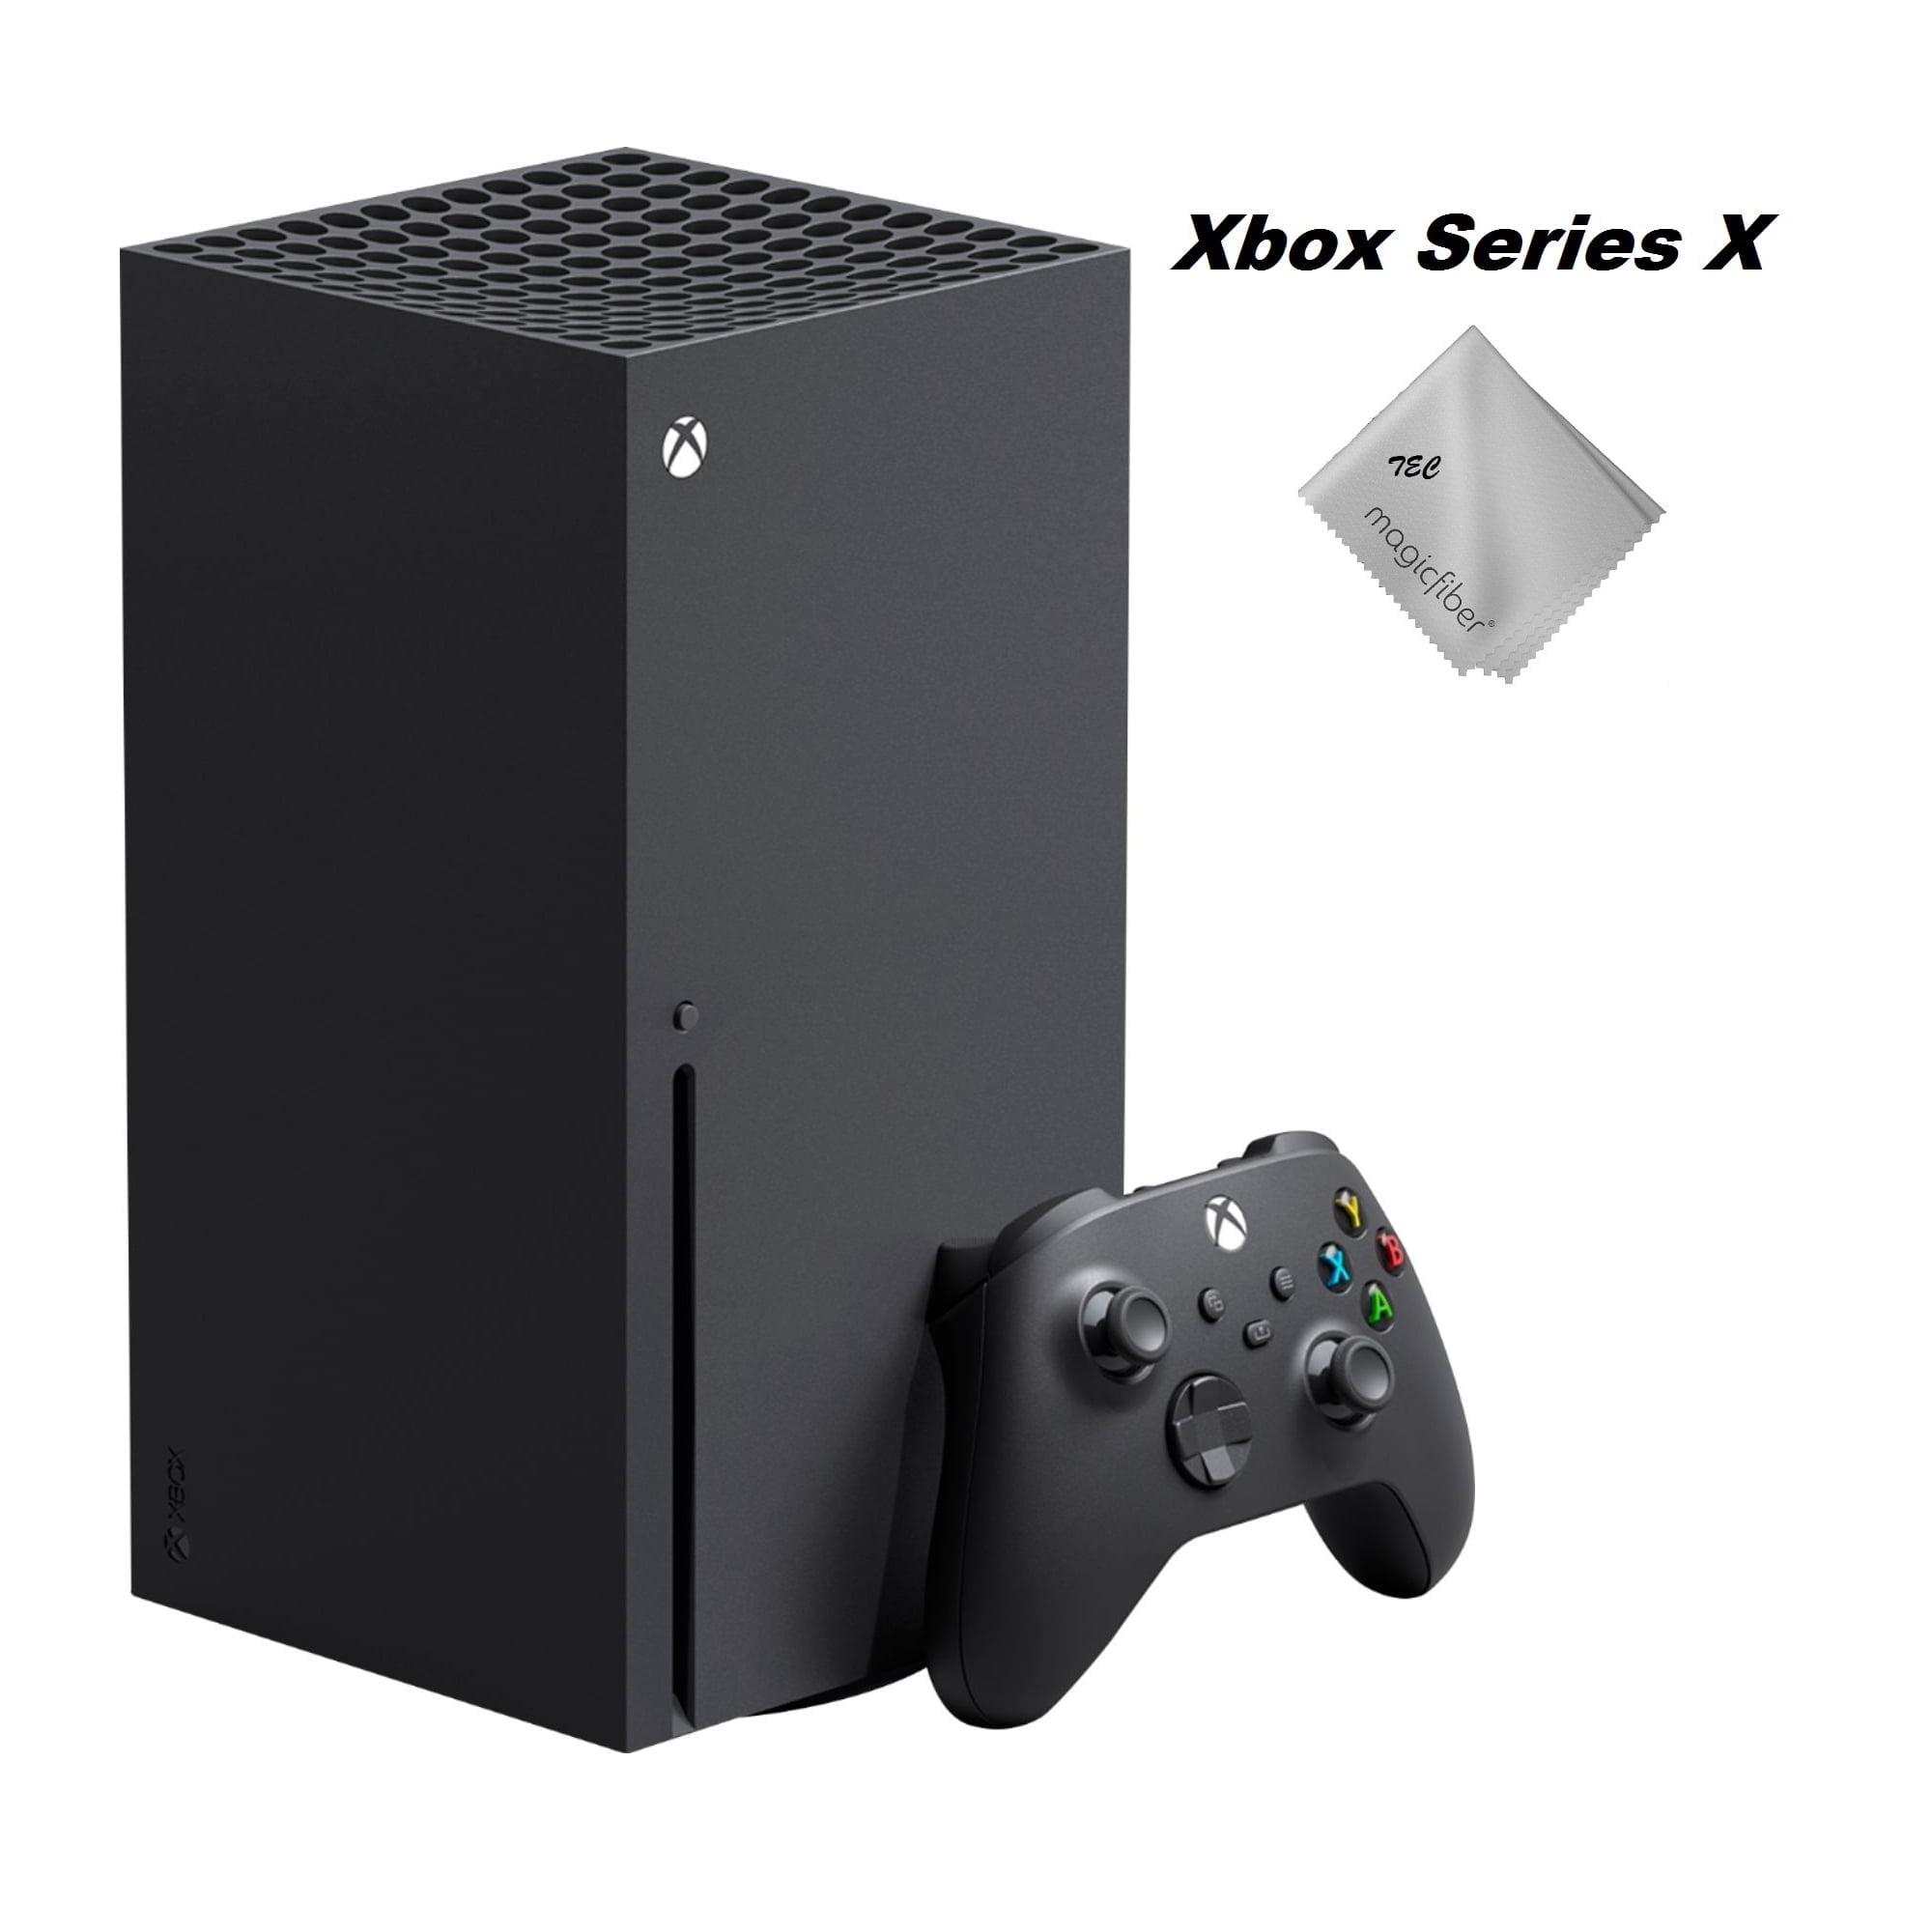 XBOX Series X Console Review- The Next Generation Of Gaming